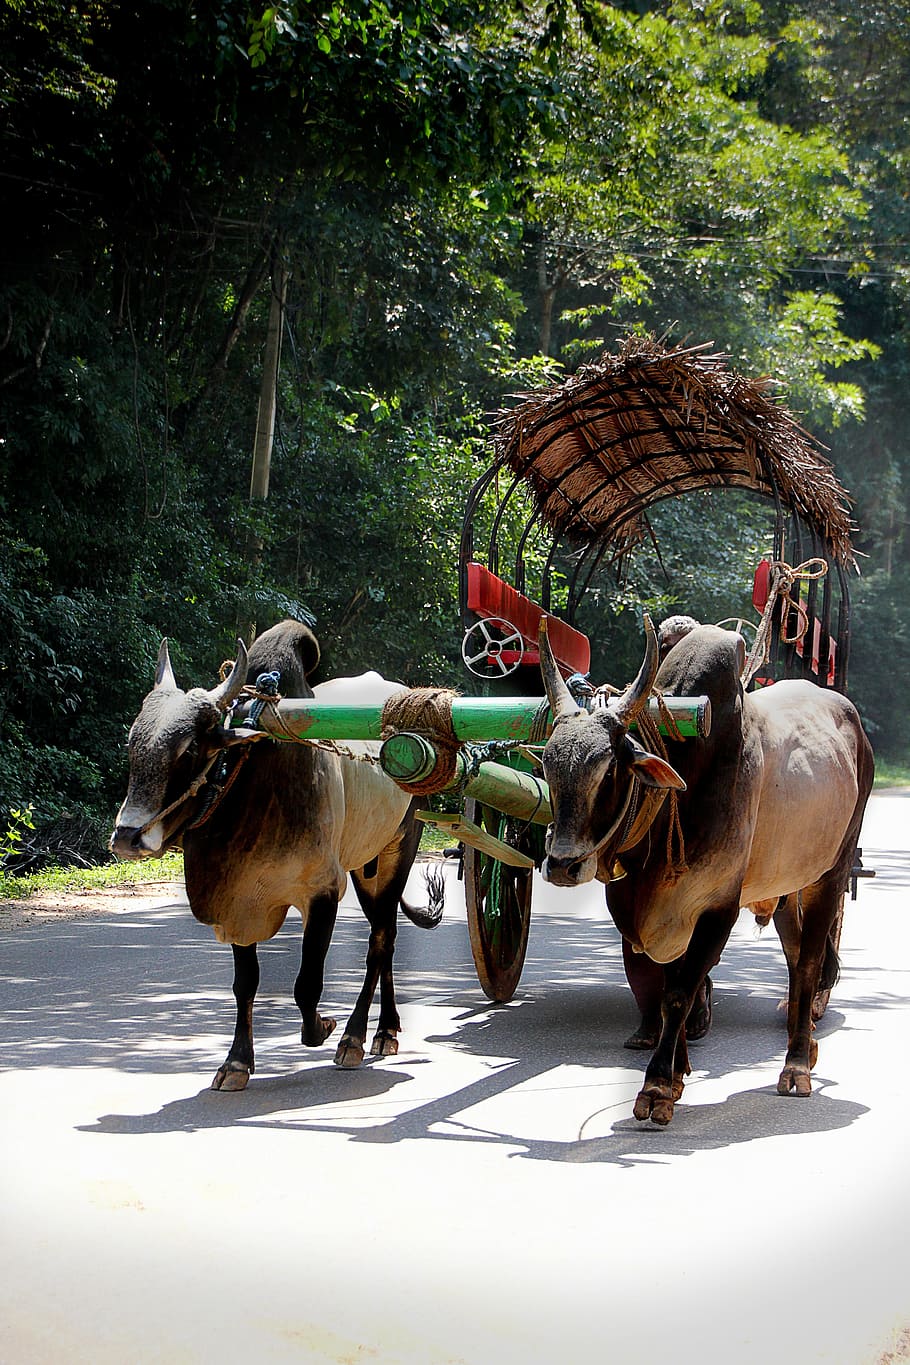 Cart, Oxcart, Bauer, Sri Lanka, Road, rural, agriculture, dare